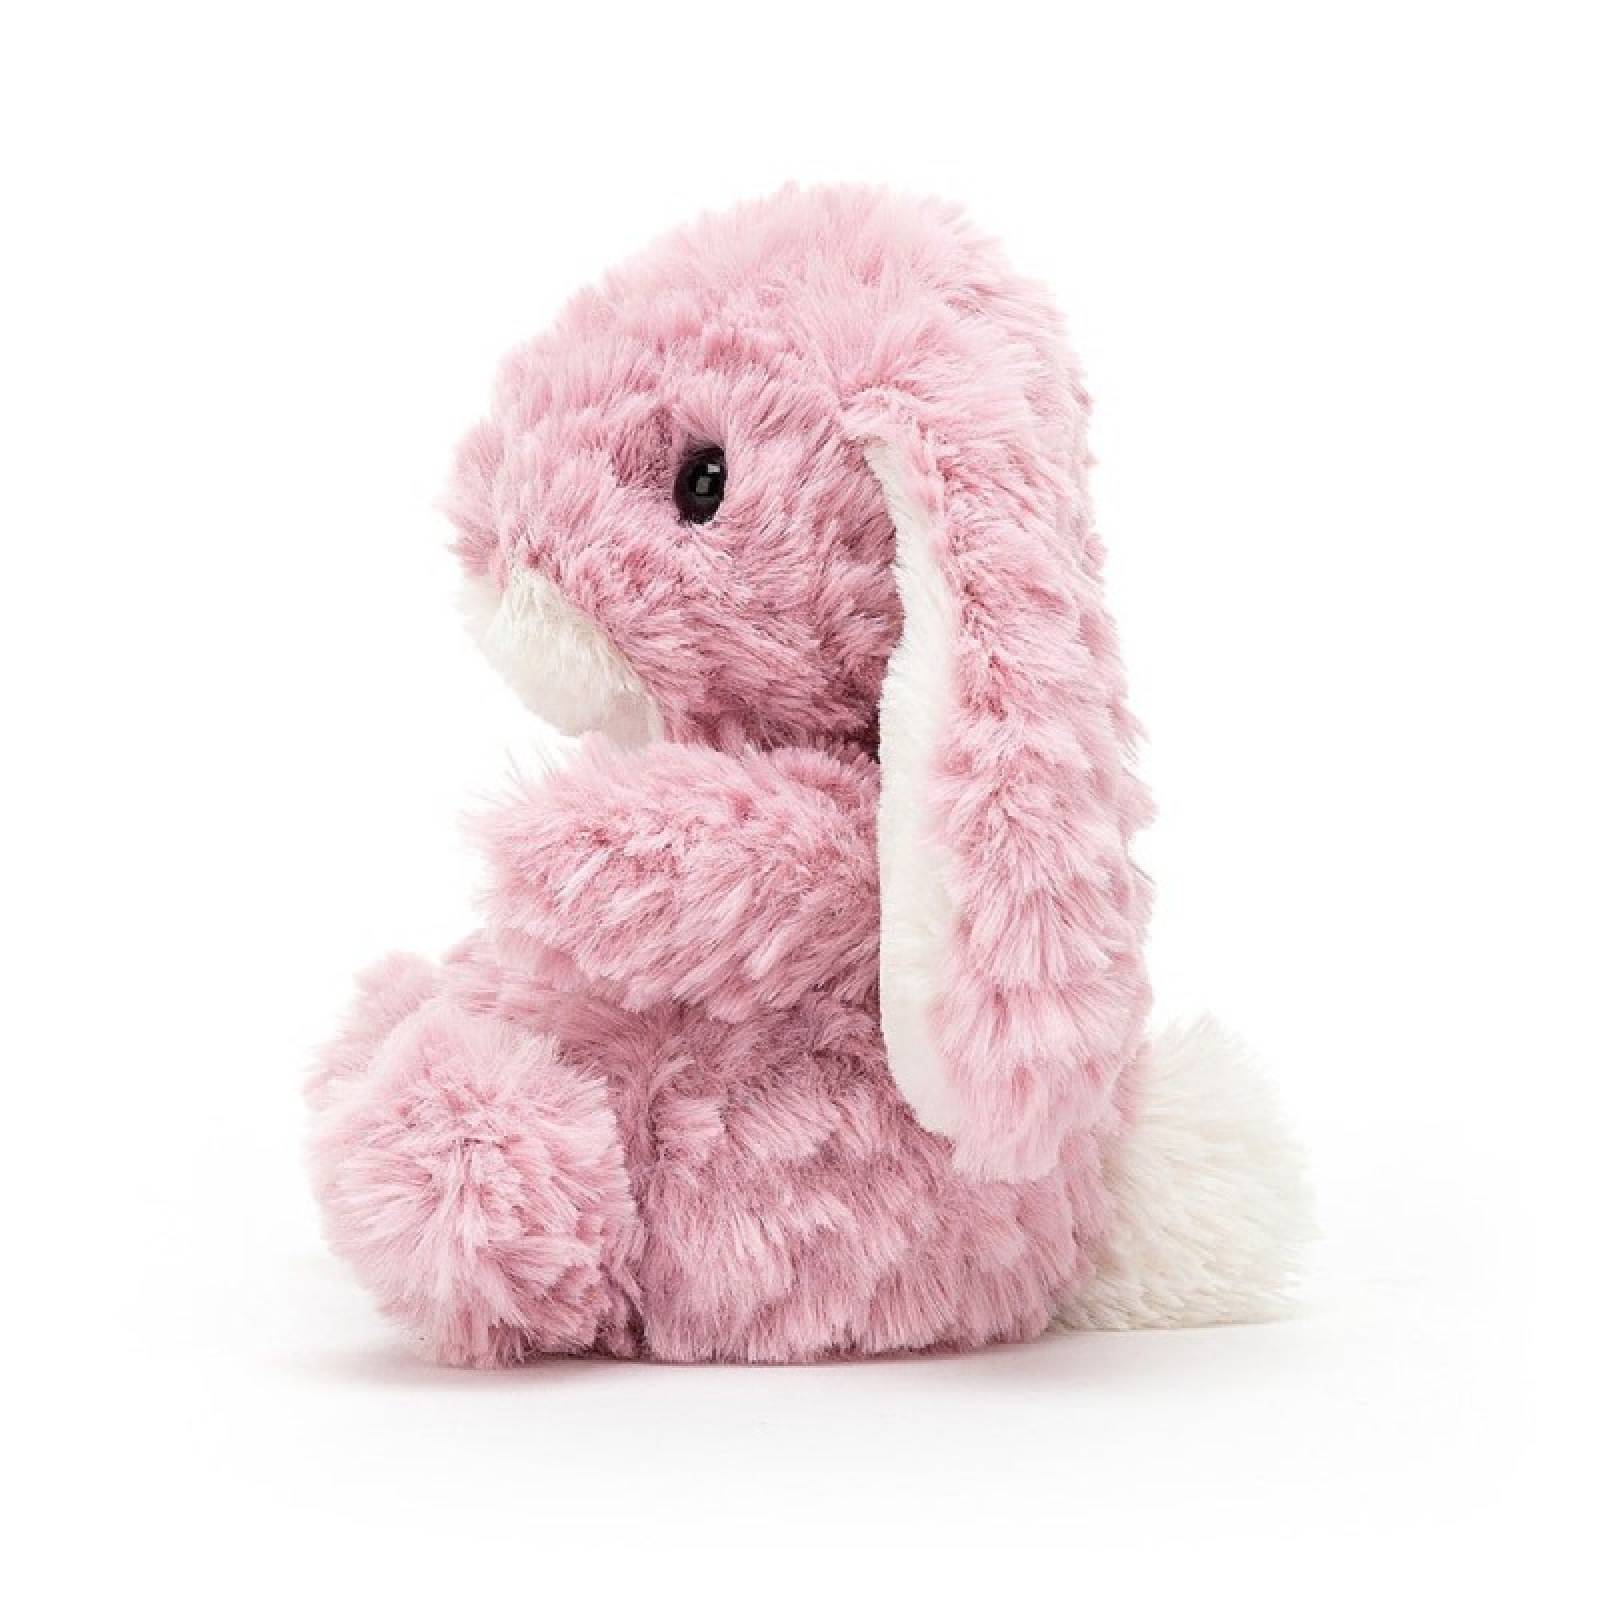 Yummy Tulip Pink Bunny Soft Toy By Jellycat 0+ thumbnails